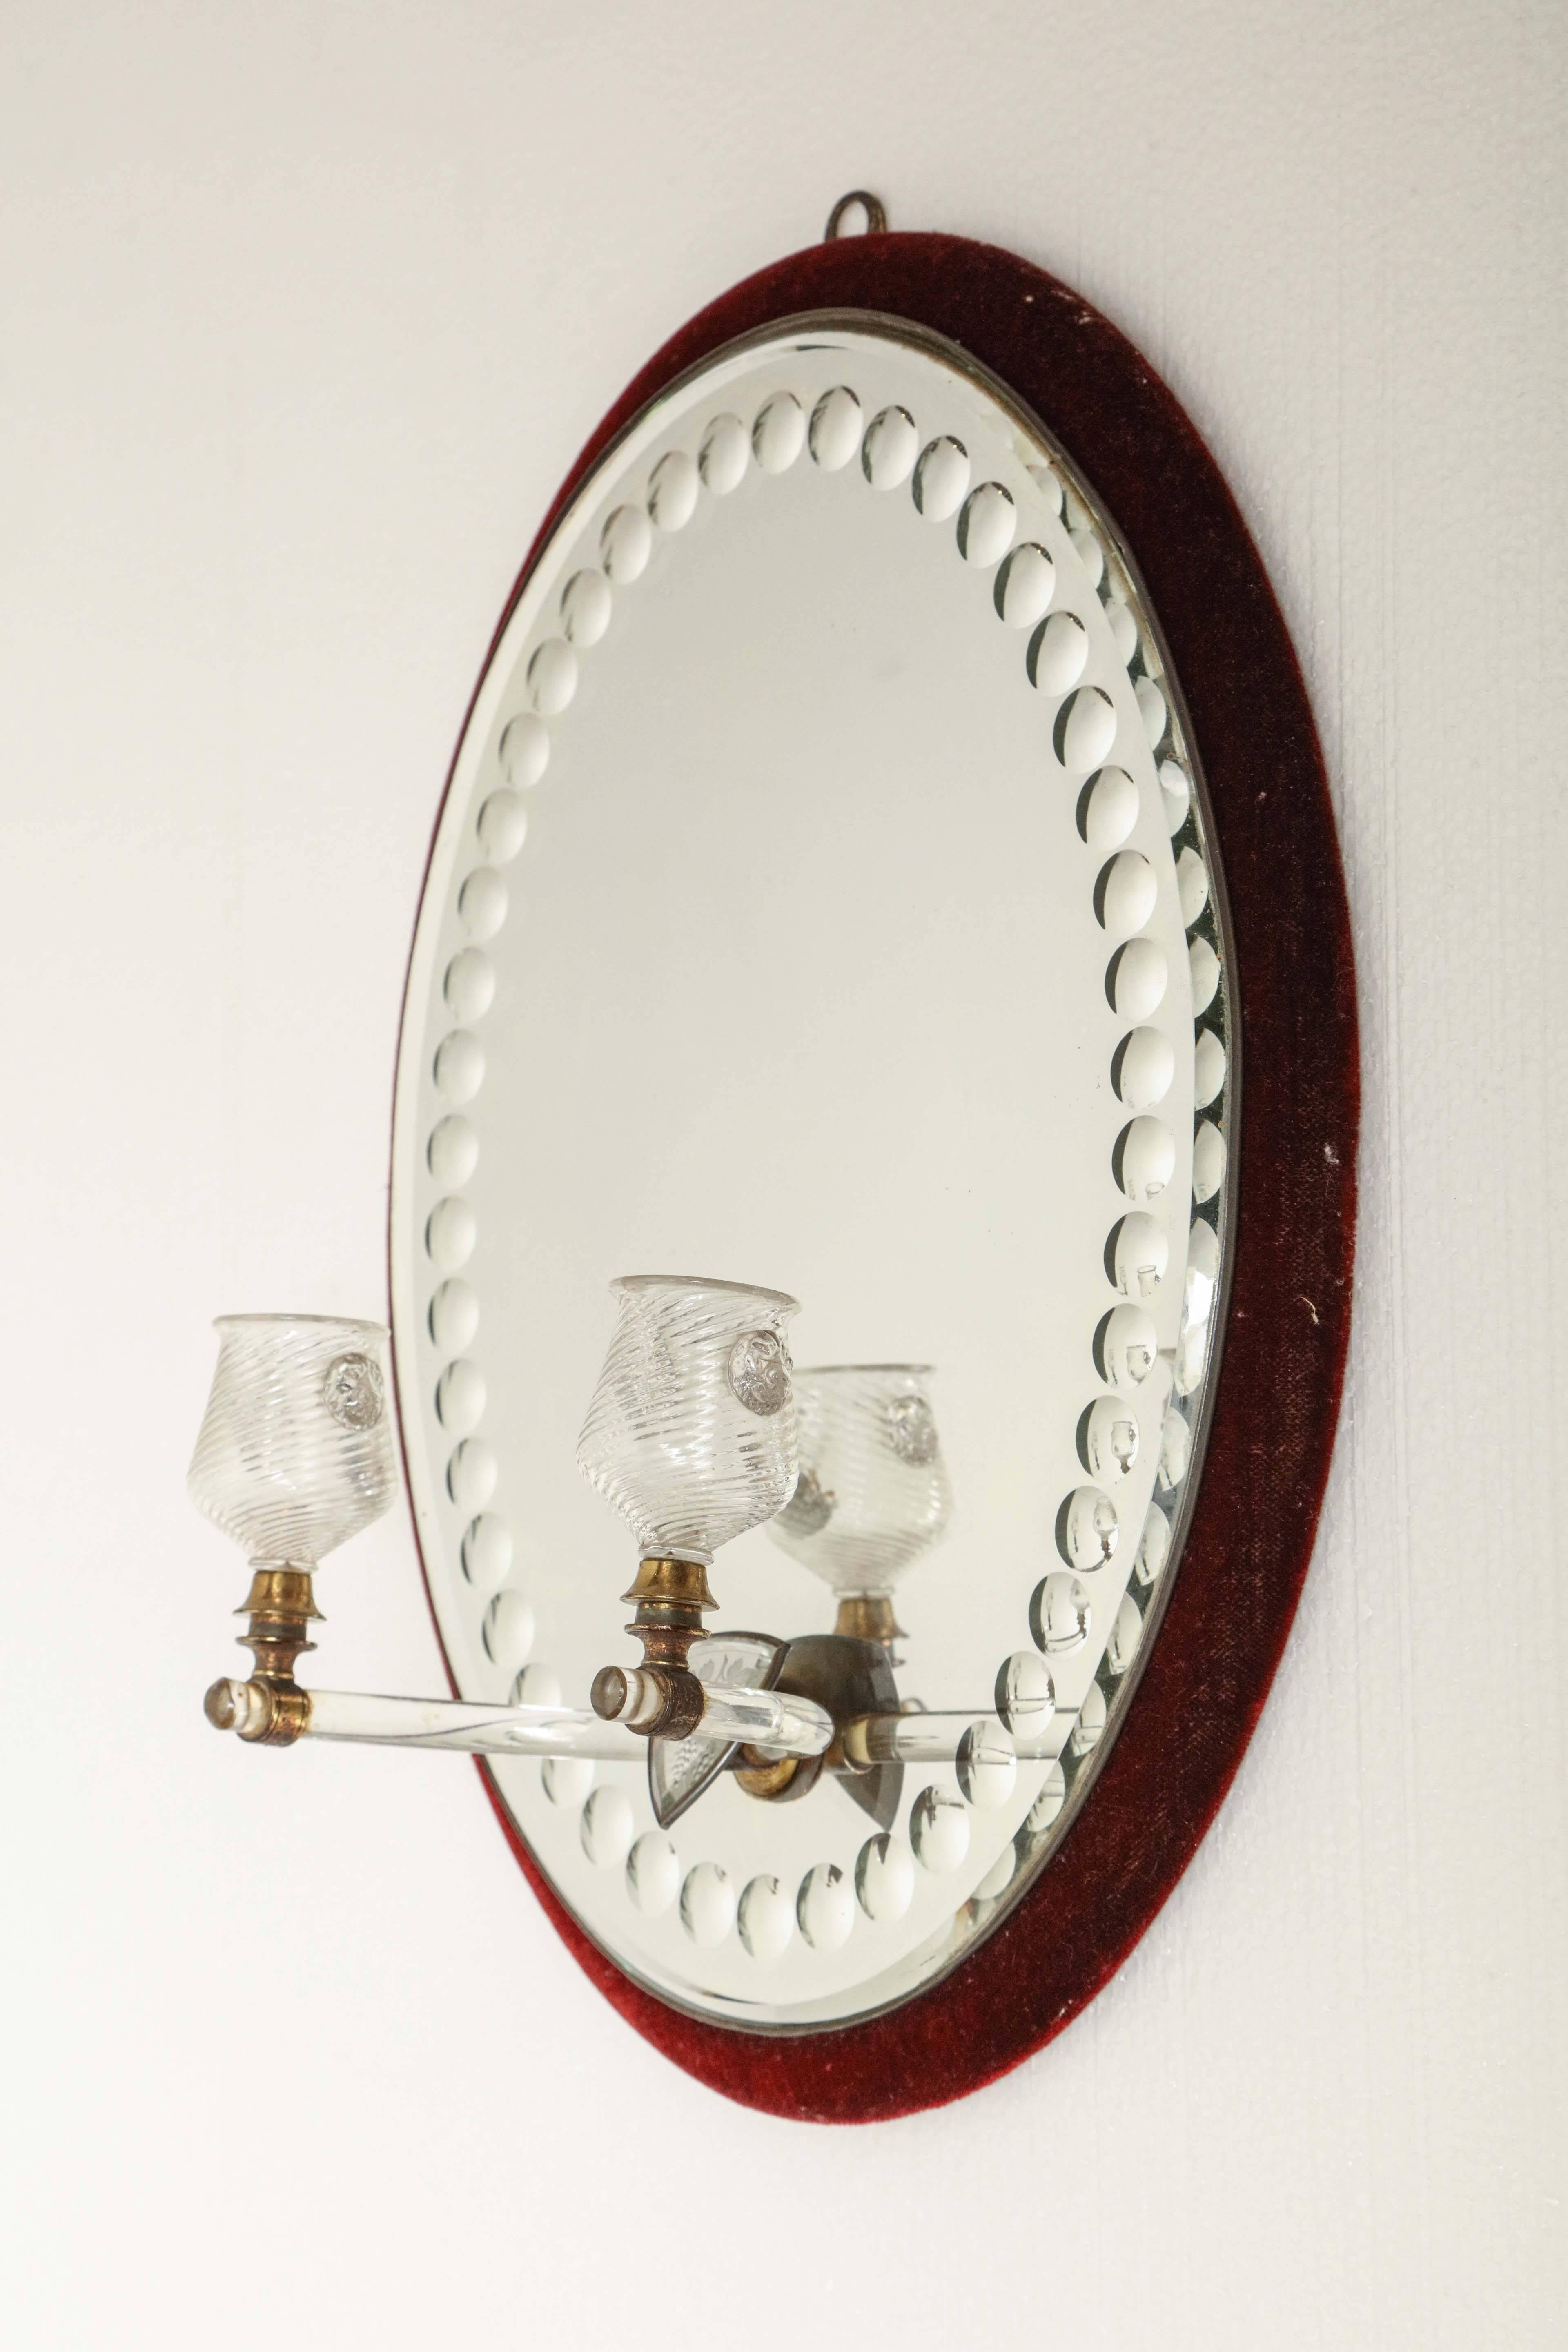 Mid-19th century mirror with plush covered frame.